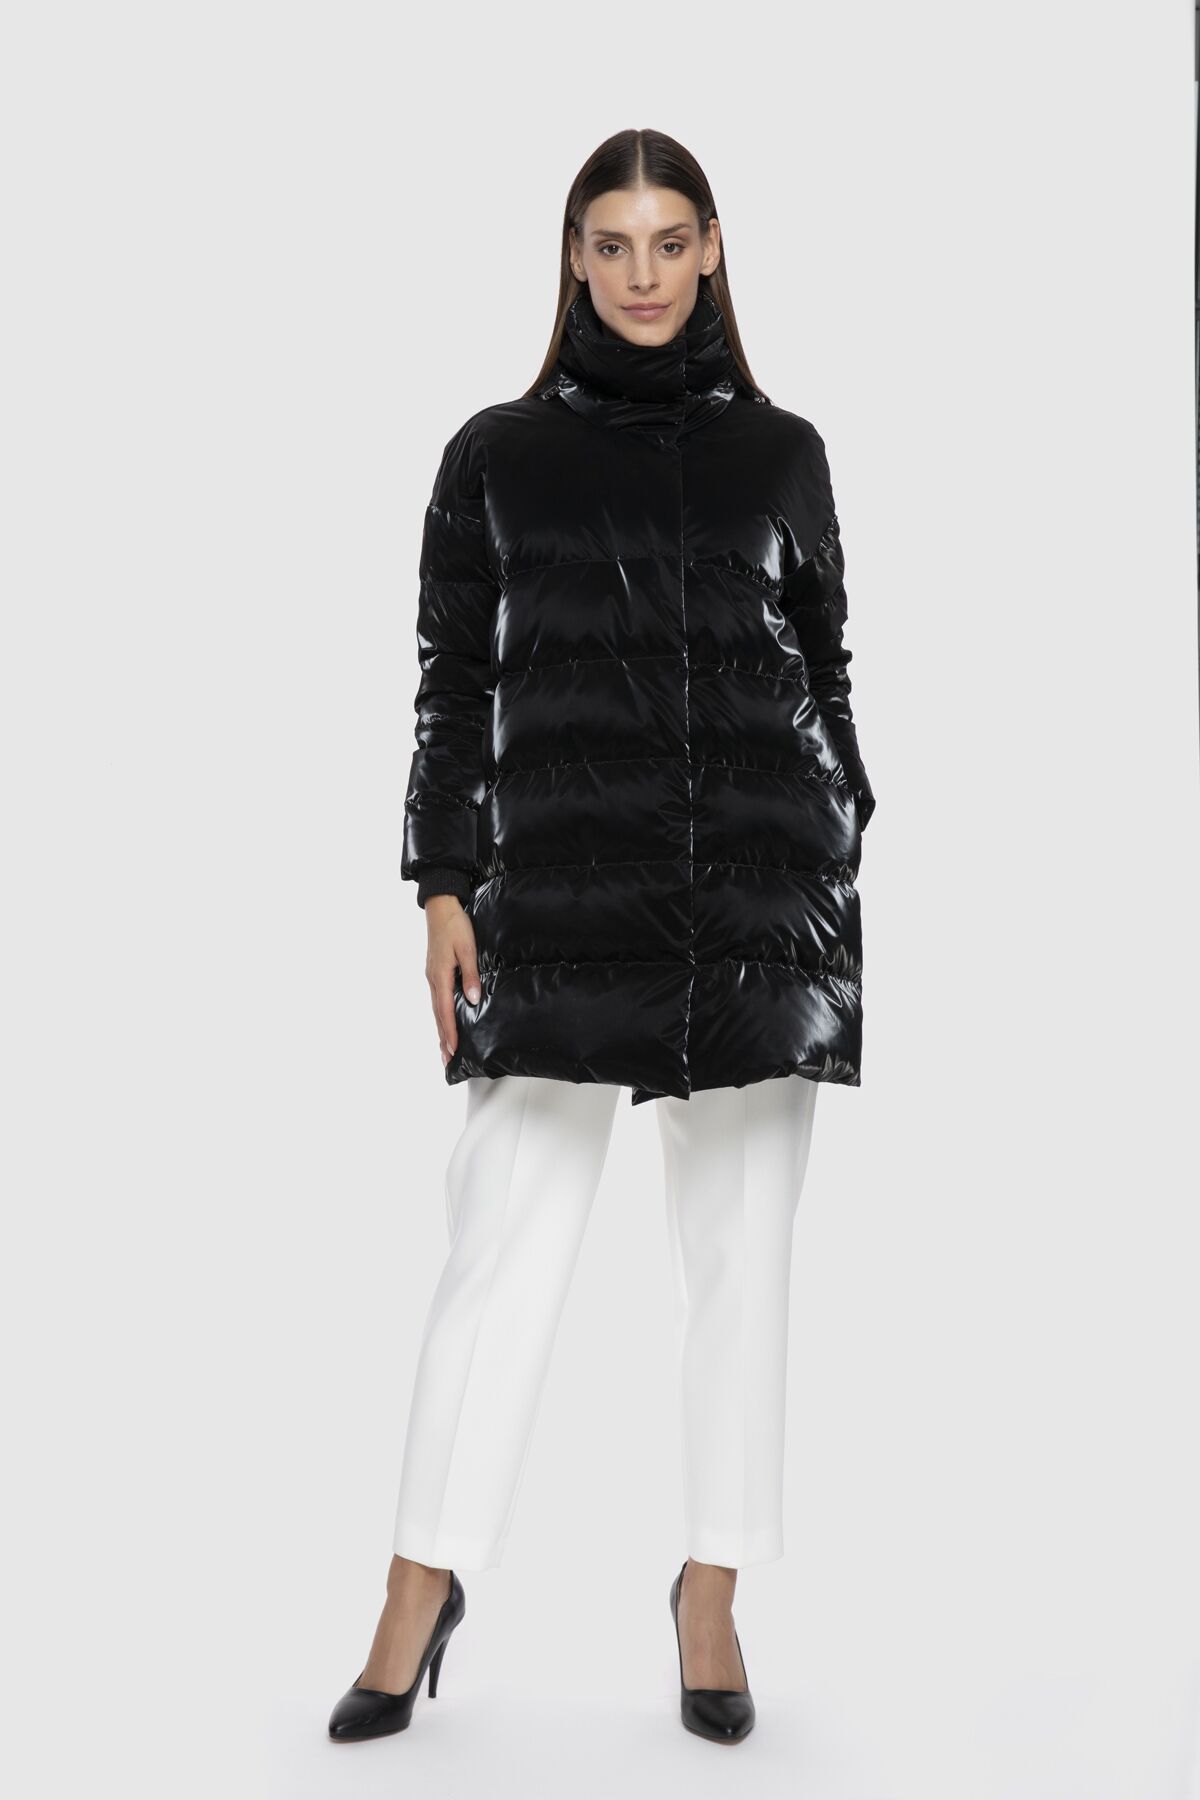  GIZIA - Low Shoulder Stand Up Collar Quilted Goose Down Black Down Jacket